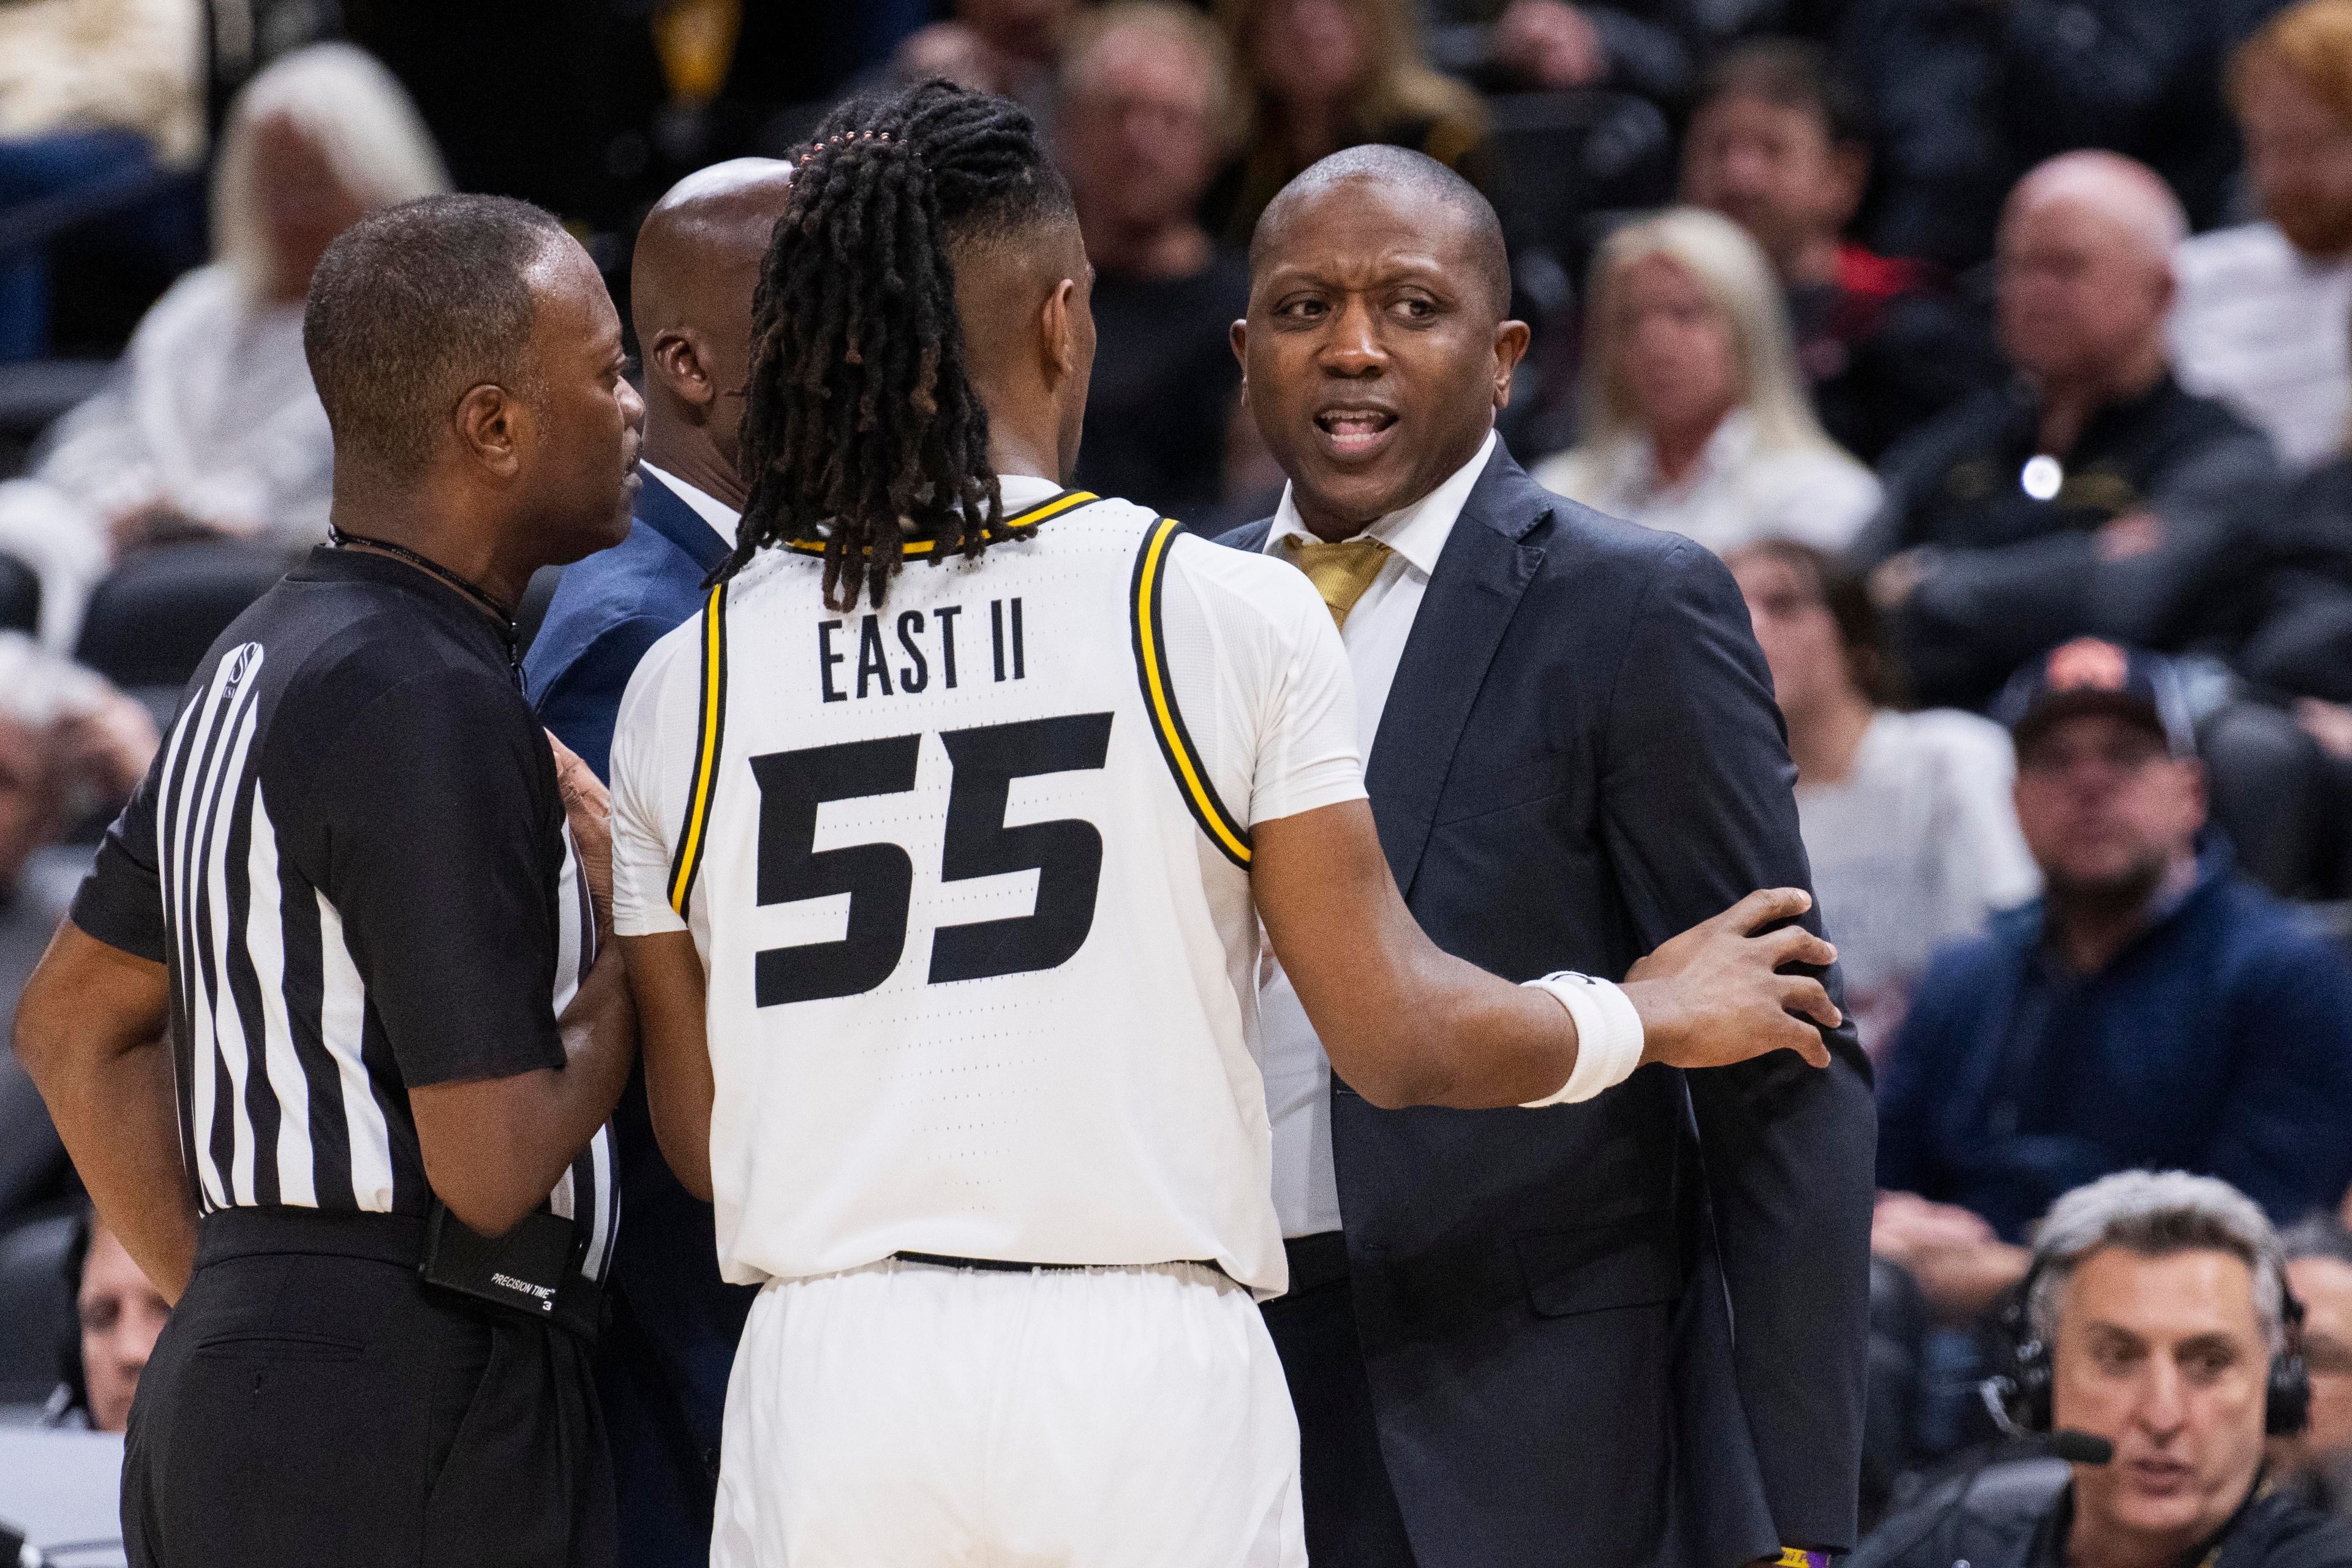 Missouri head coach Dennis Gates, right, is held back by Sean East II (55) after the bench had a technical foul called during the first half of an NCAA college basketball game against Auburn Tuesday, March 5, 2024, in Columbia, Mo. (AP Photo/L.G. Patterson)